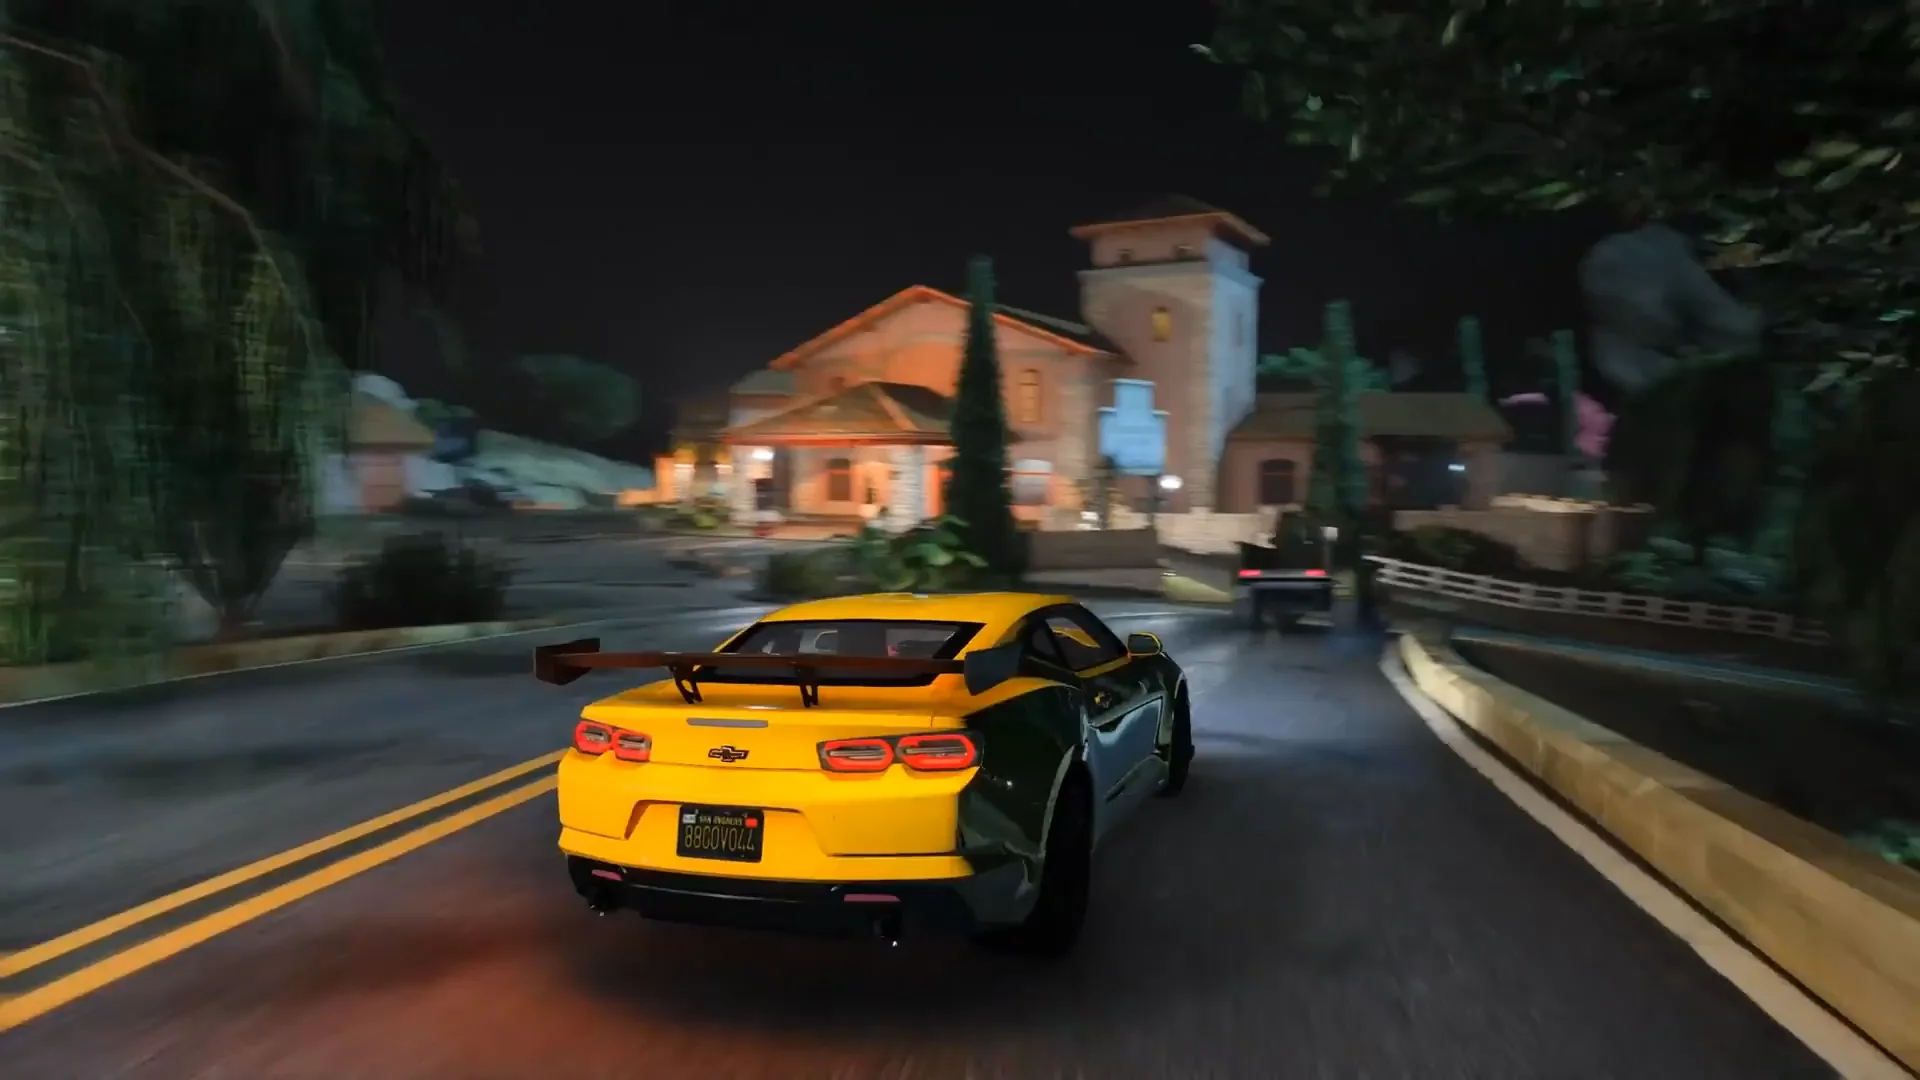 Go To Auto 3: Online Apk Download for Android- Latest version 0.13.2- com. gta.auto.online